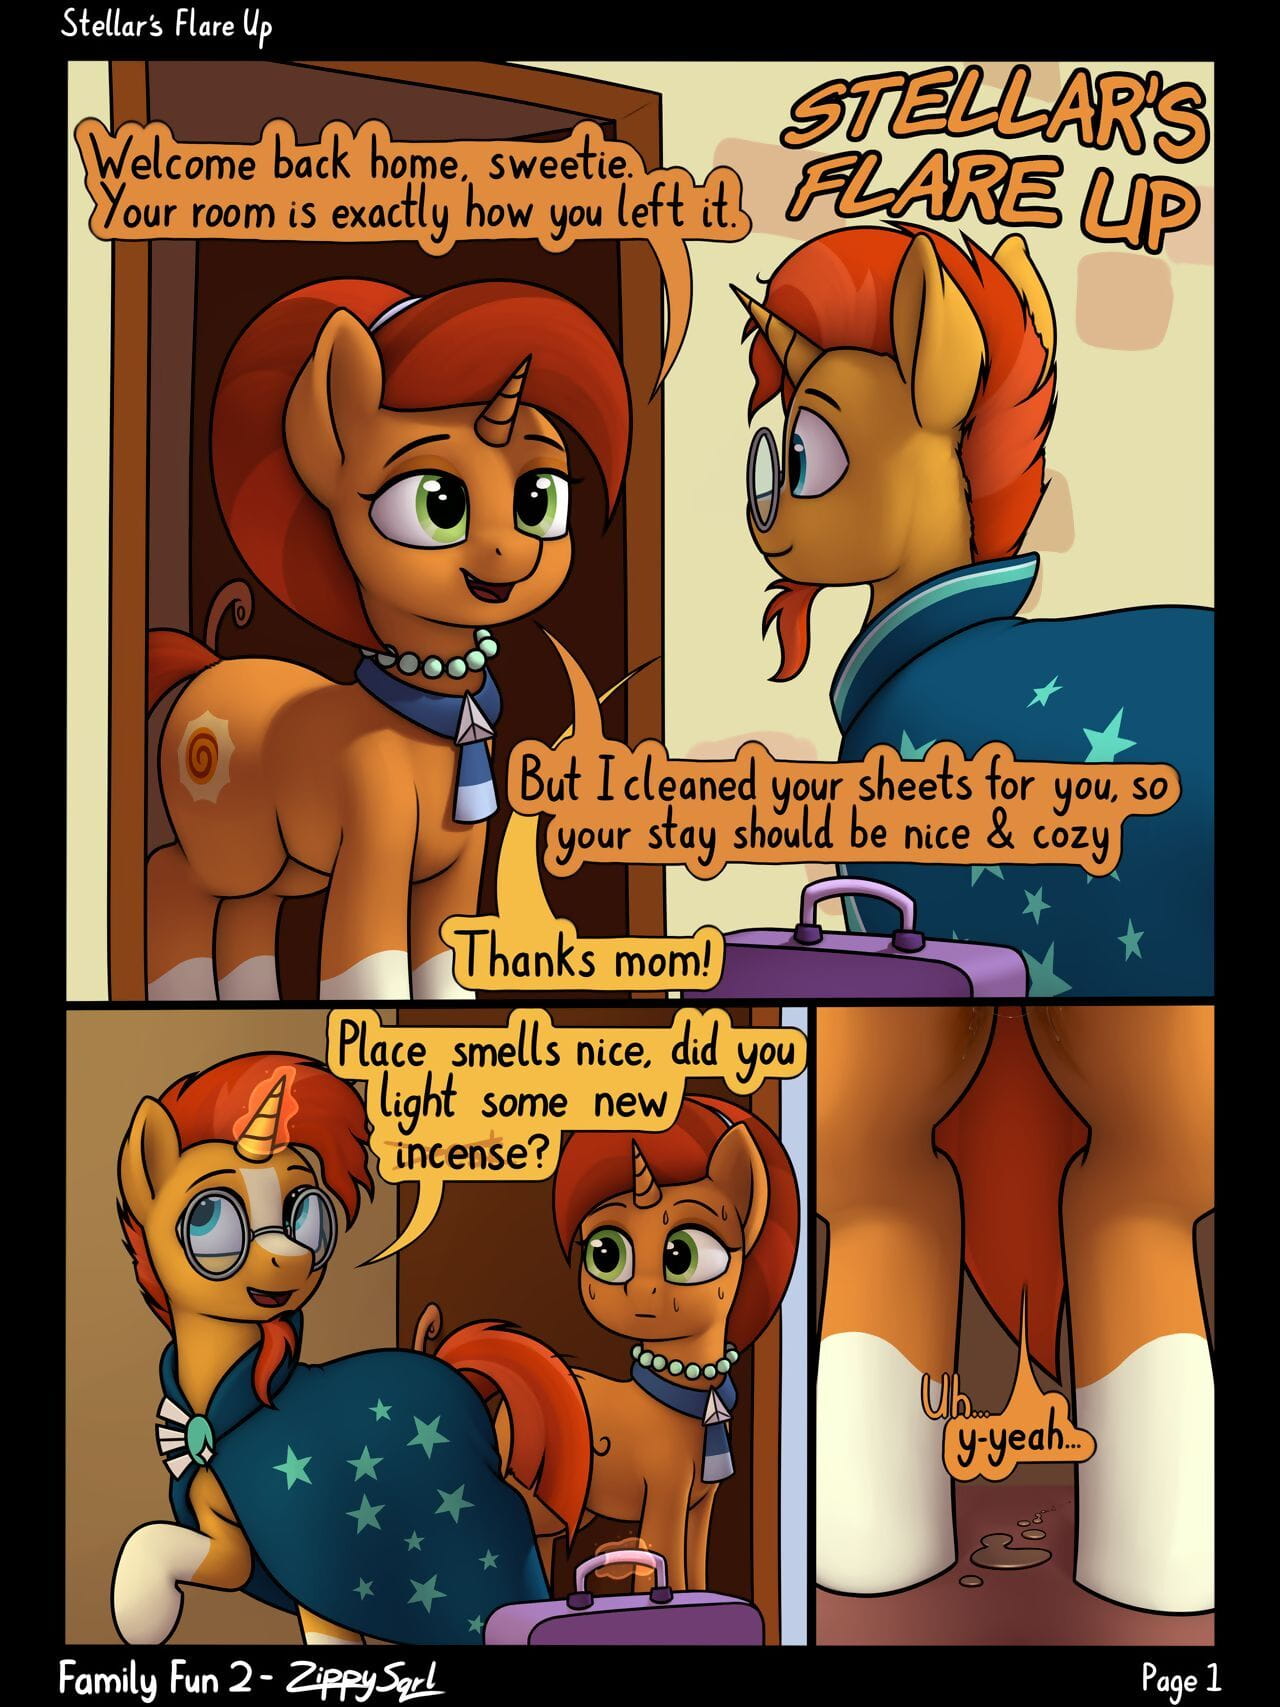 Stellars Flare Up. page 1